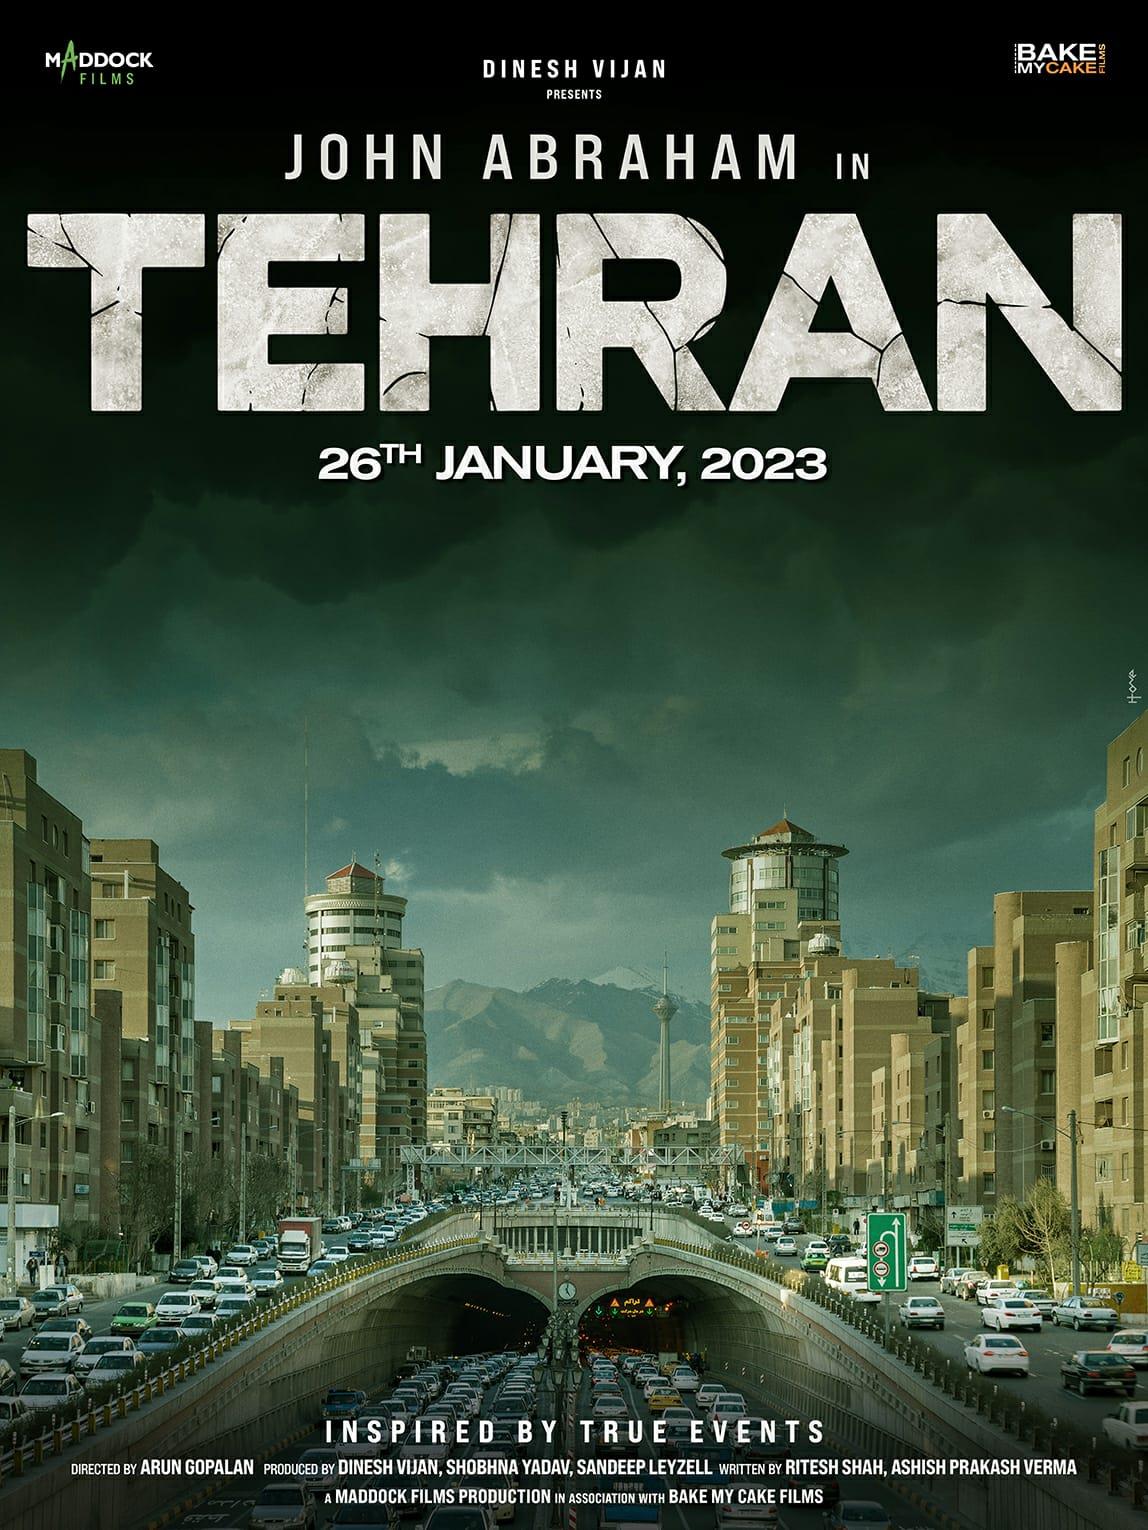 John Abraham dibs on Republic Day 2023 for action-thriller ‘Tehran’ in first-time collaboration with Dinesh Vijan